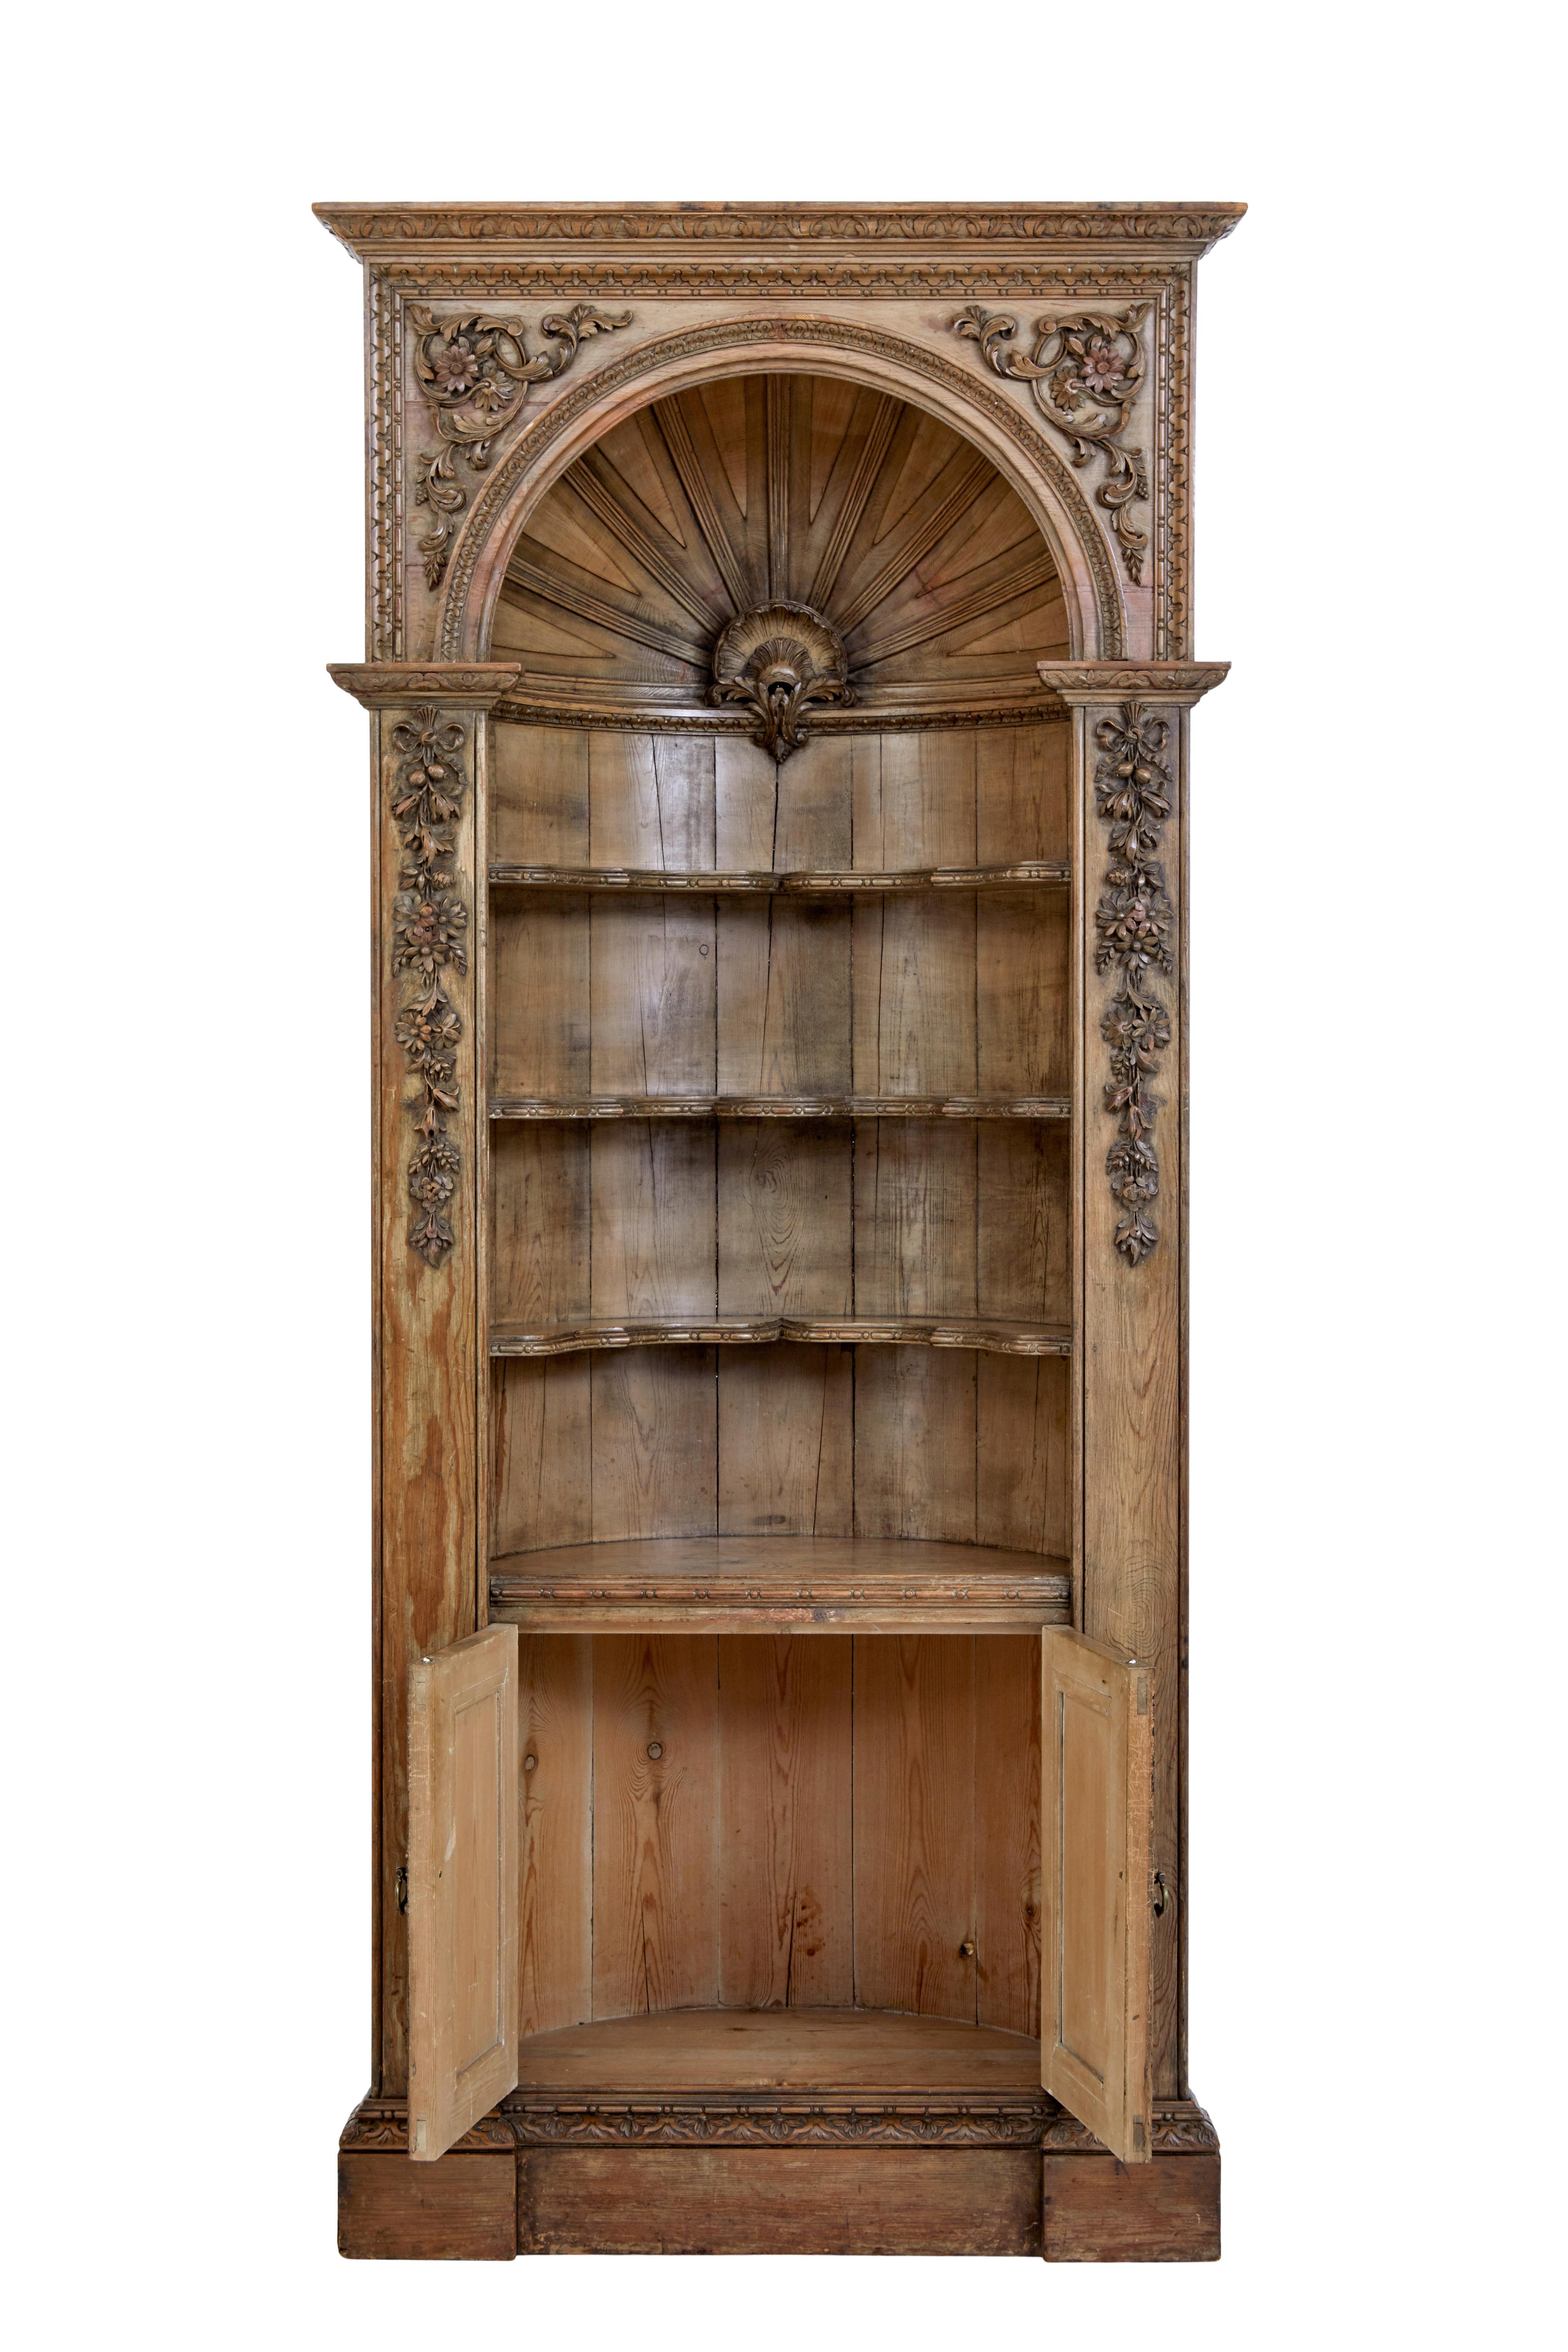 Fine quality English mid 18th century carved pine dome top fitted cabinet circa 1760.

Excellent quality piece that would have been fitted into a wall recess, with the outer frame flush to the wall.

Architectural carved cornice, decorated with